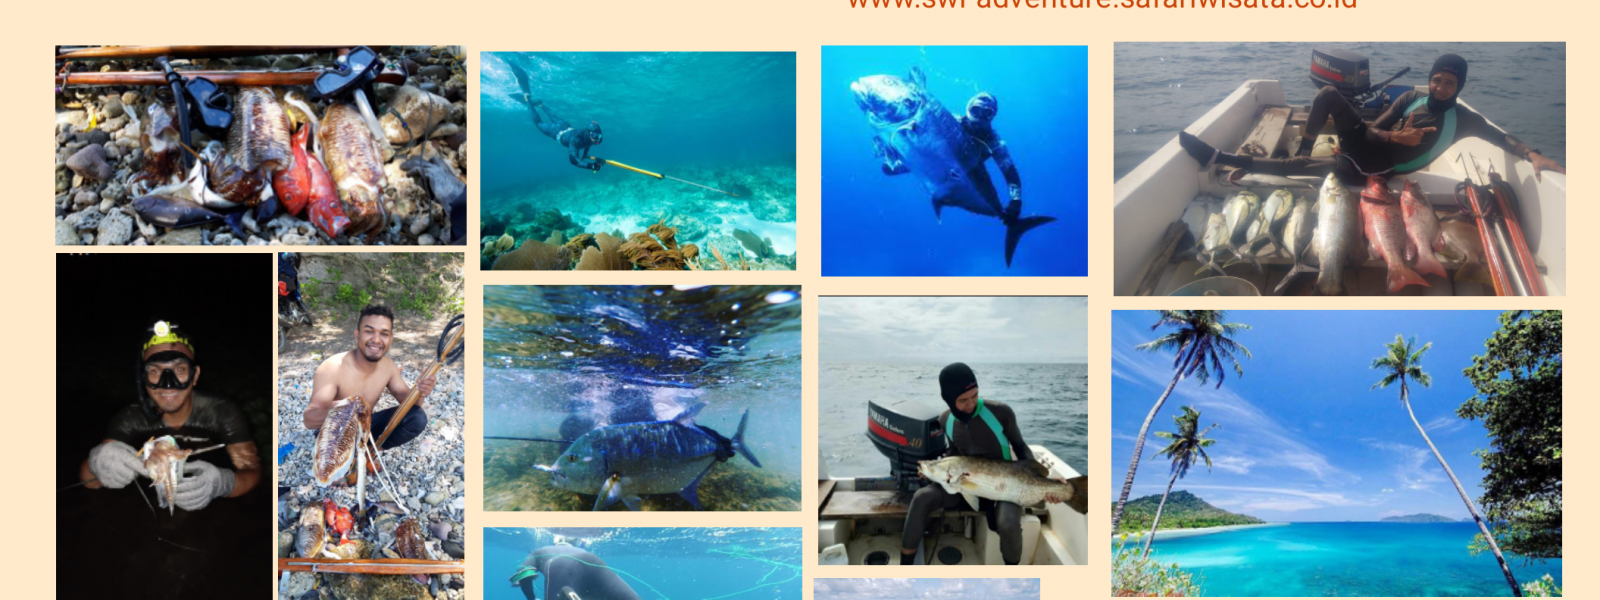 Aceh Spearfishing Trip